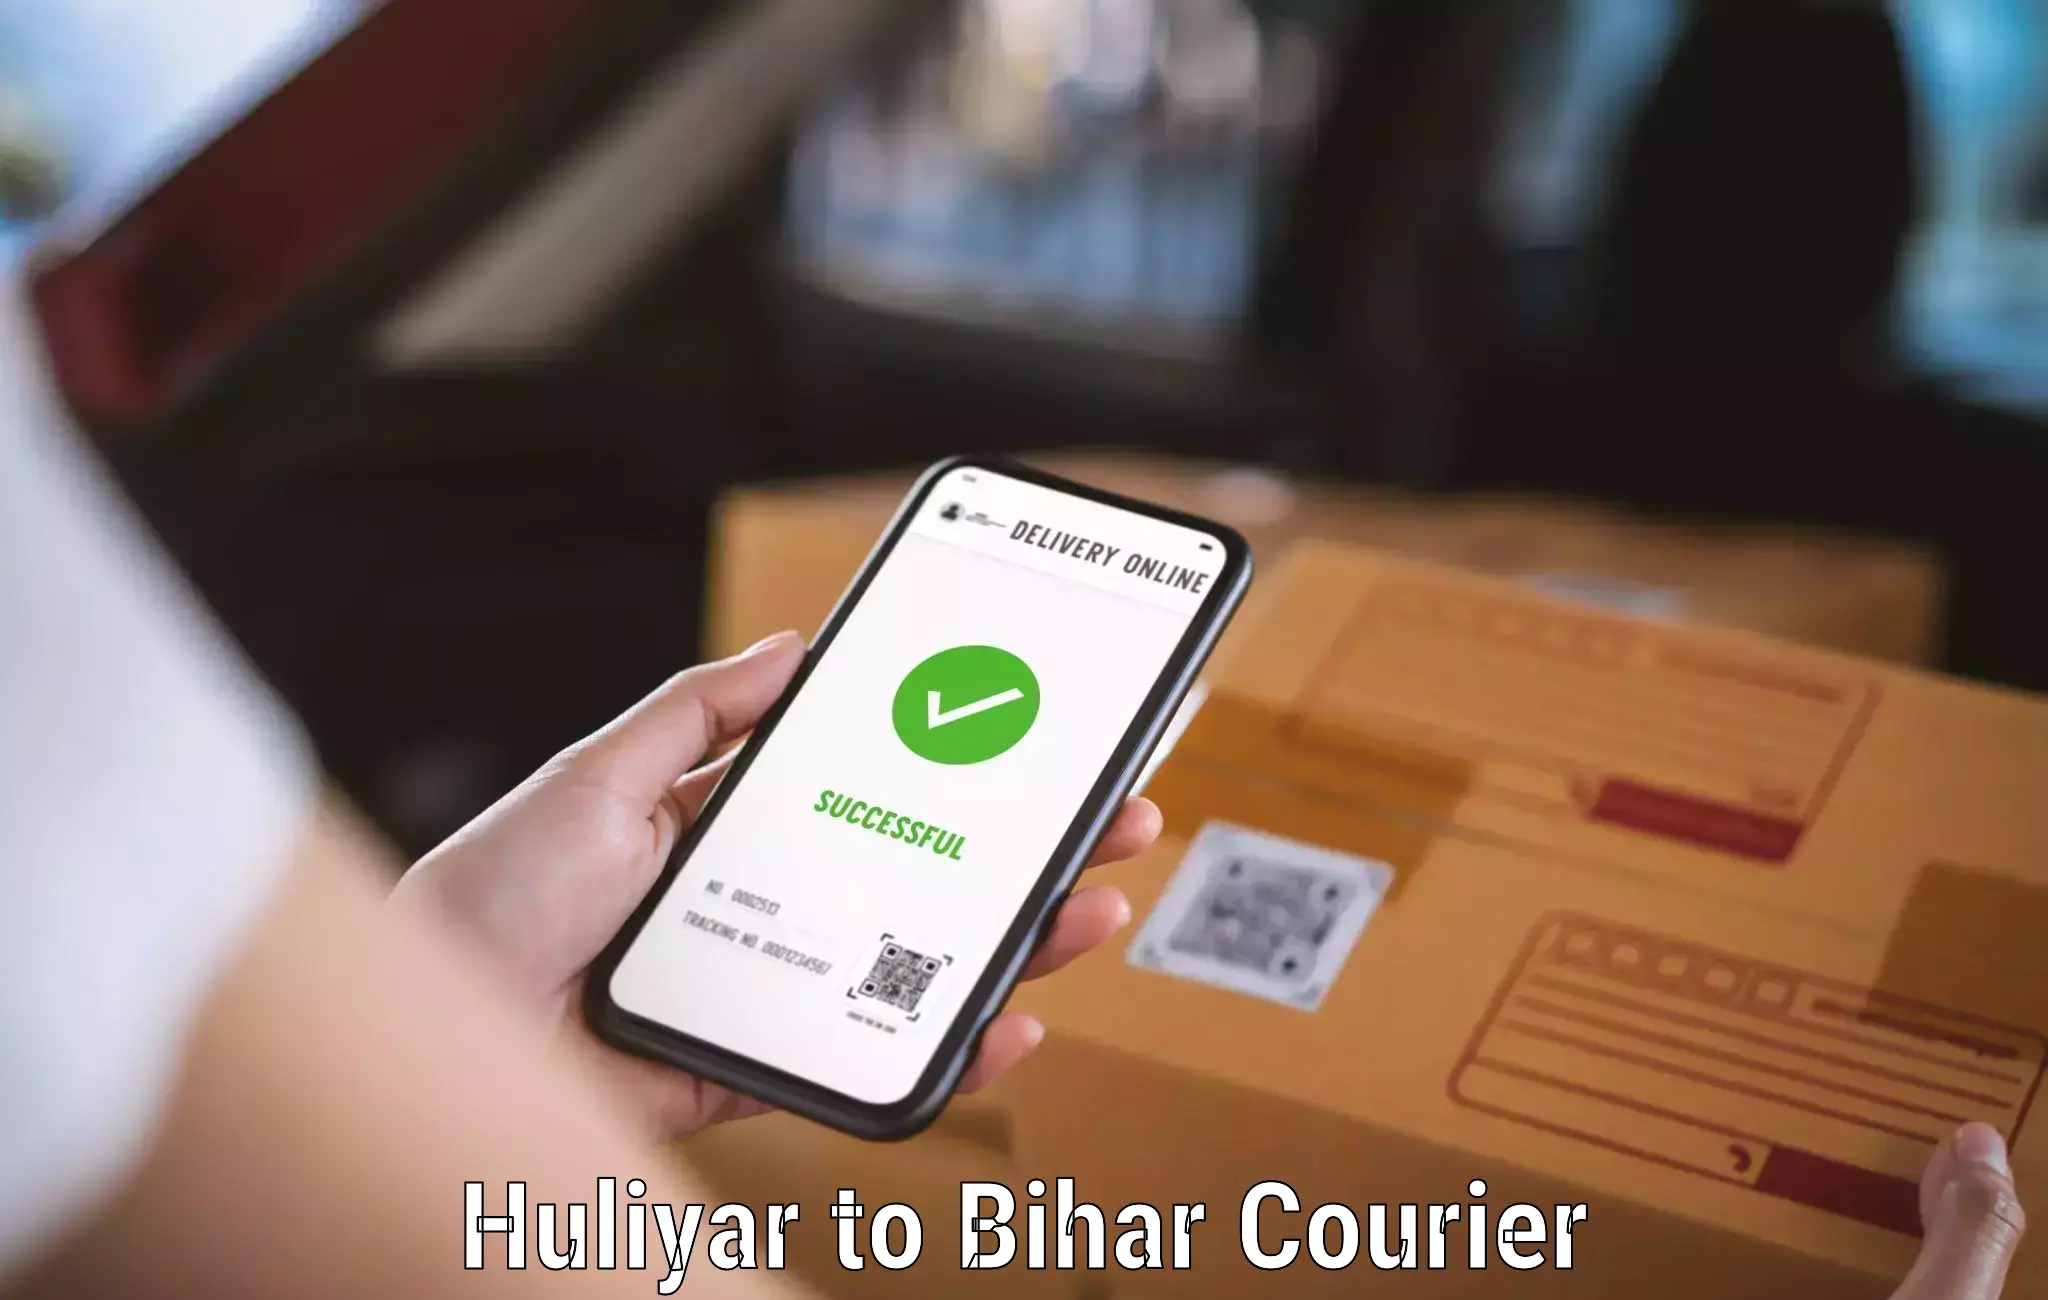 Professional courier services Huliyar to Singhia